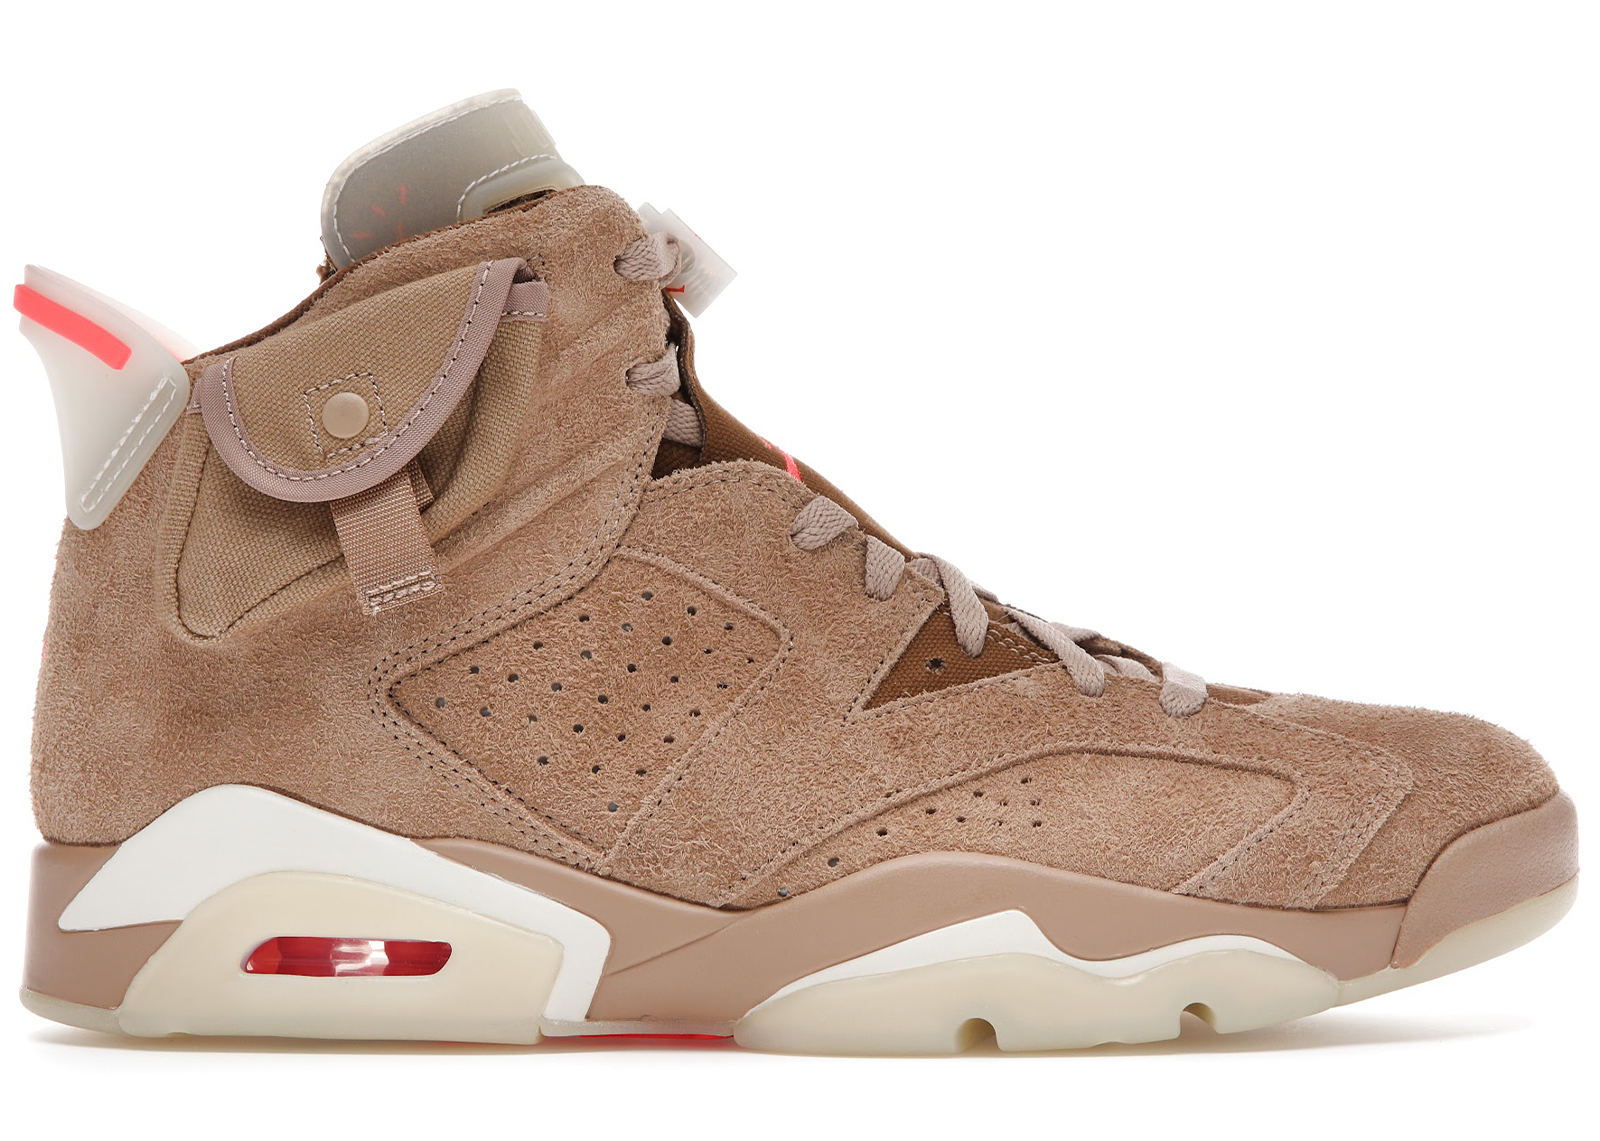 Jordan 6 - All Sizes & Colorways from $71 at StockX